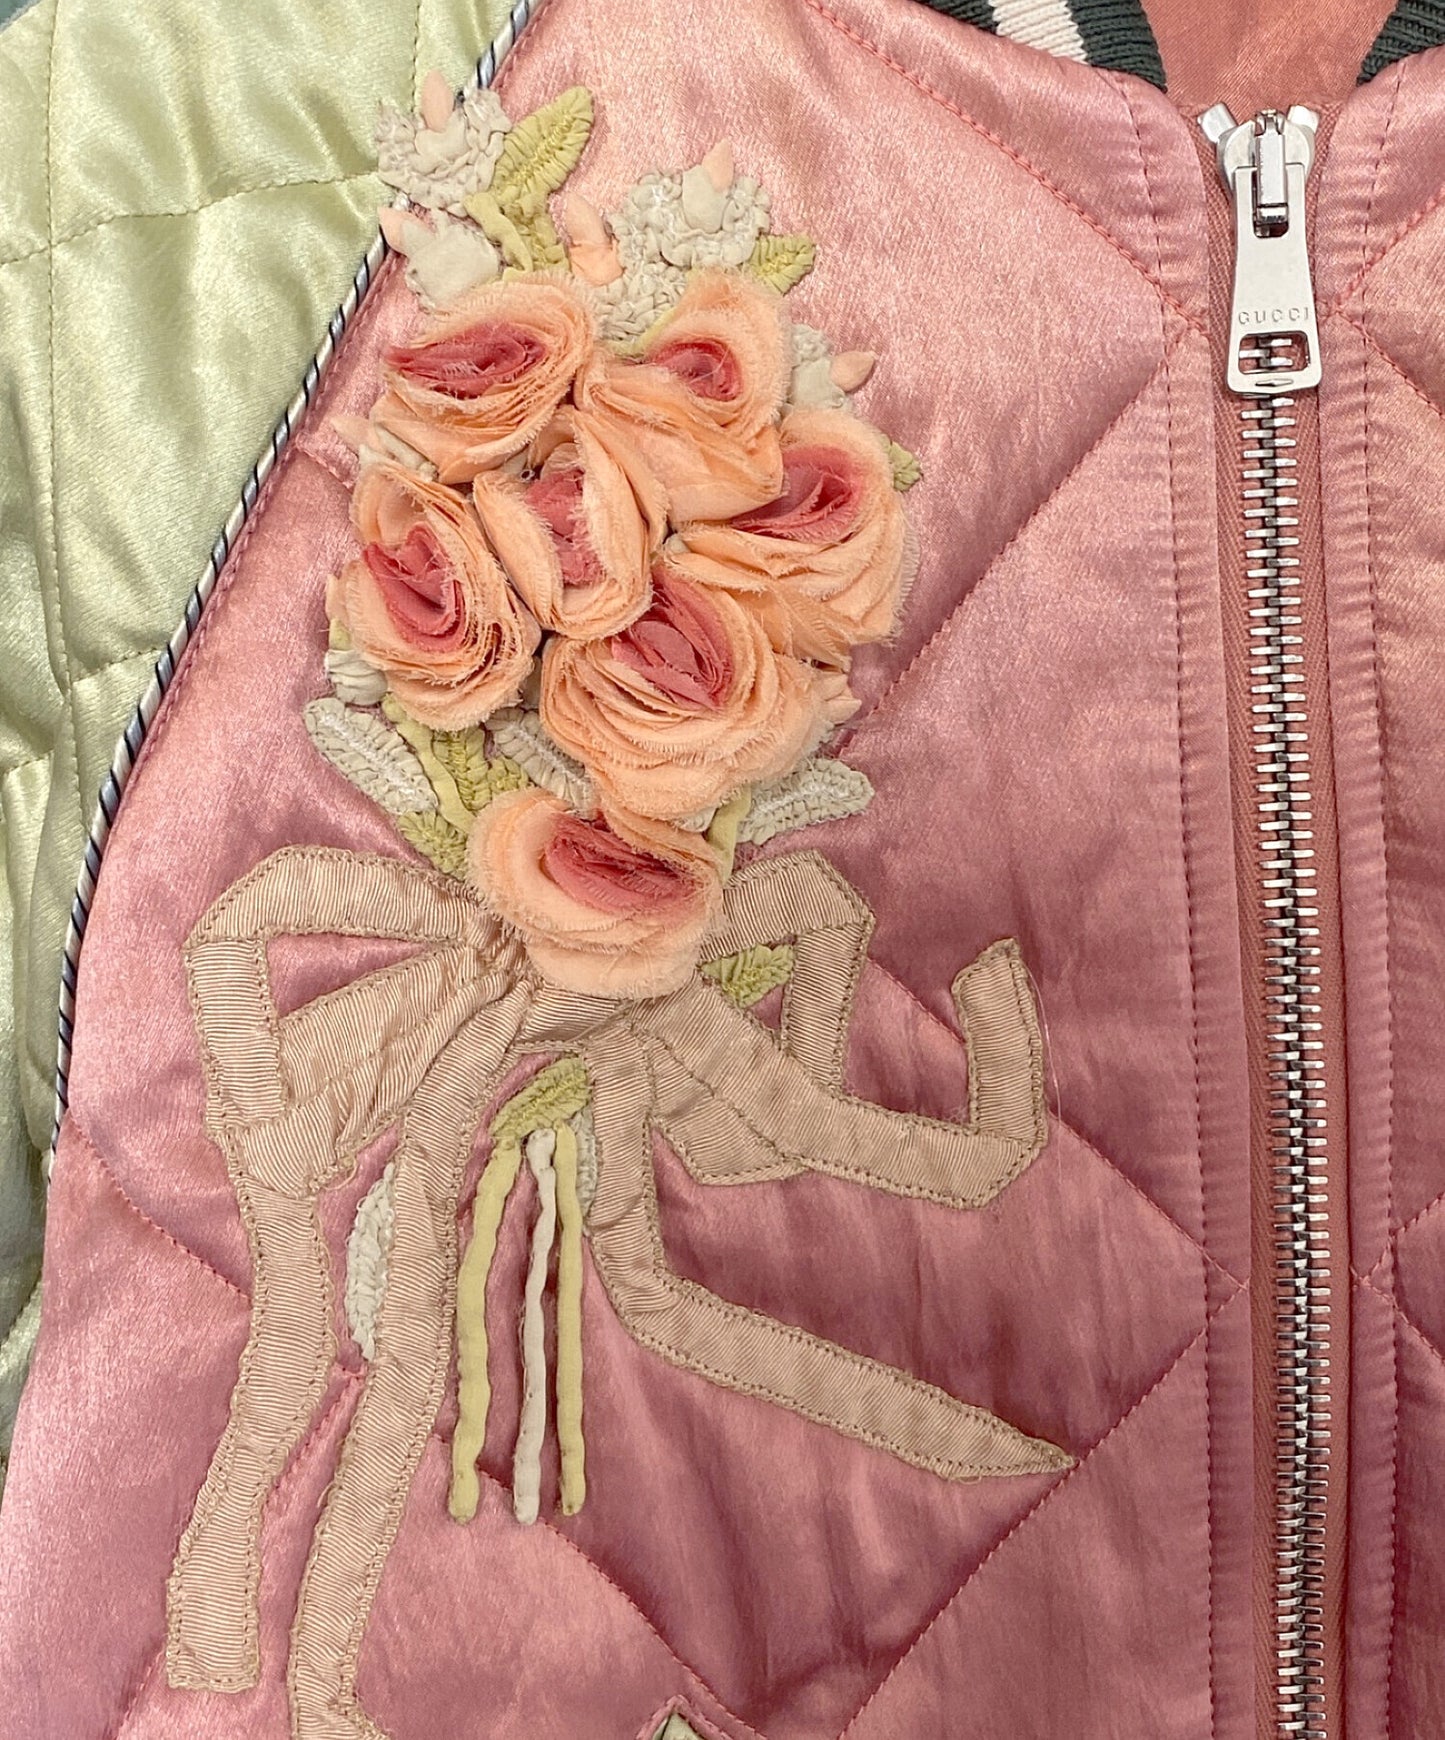 [Pre-owned] GUCCI Shunga Embroidery Souvenir Jacket 502739 XR938